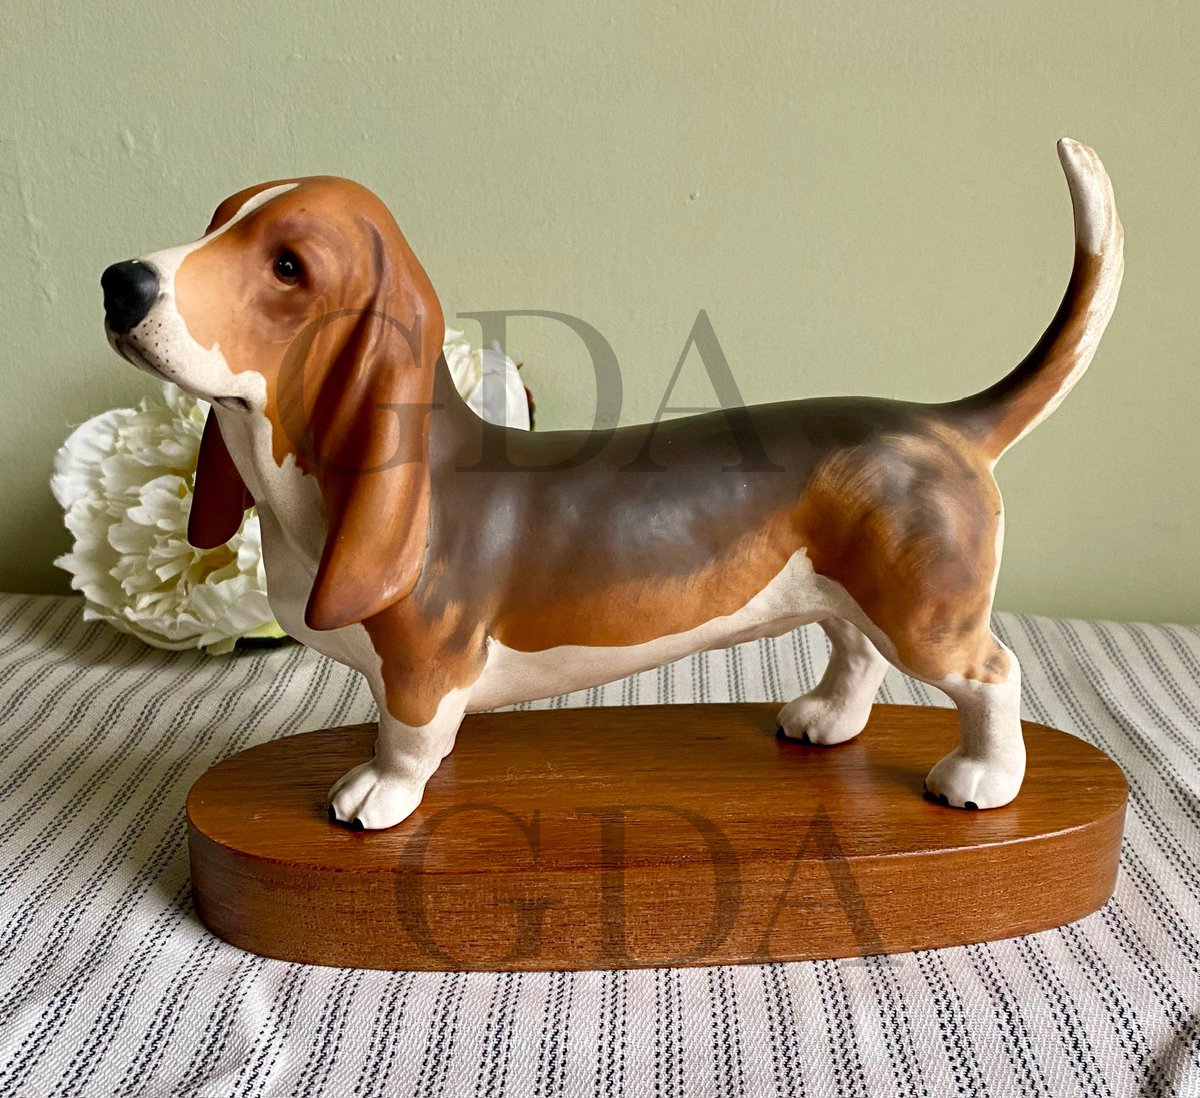 🐶🐶🐶 🐶
Meet this handsome Beswick Basset Hound. 
See him and more at,
Dieudonneart.com/antiques 

#earlybiz #dogs #Beswick #collectables #vintage #elevenseshour #hounds #shopsmalluk #shopindie #gifts